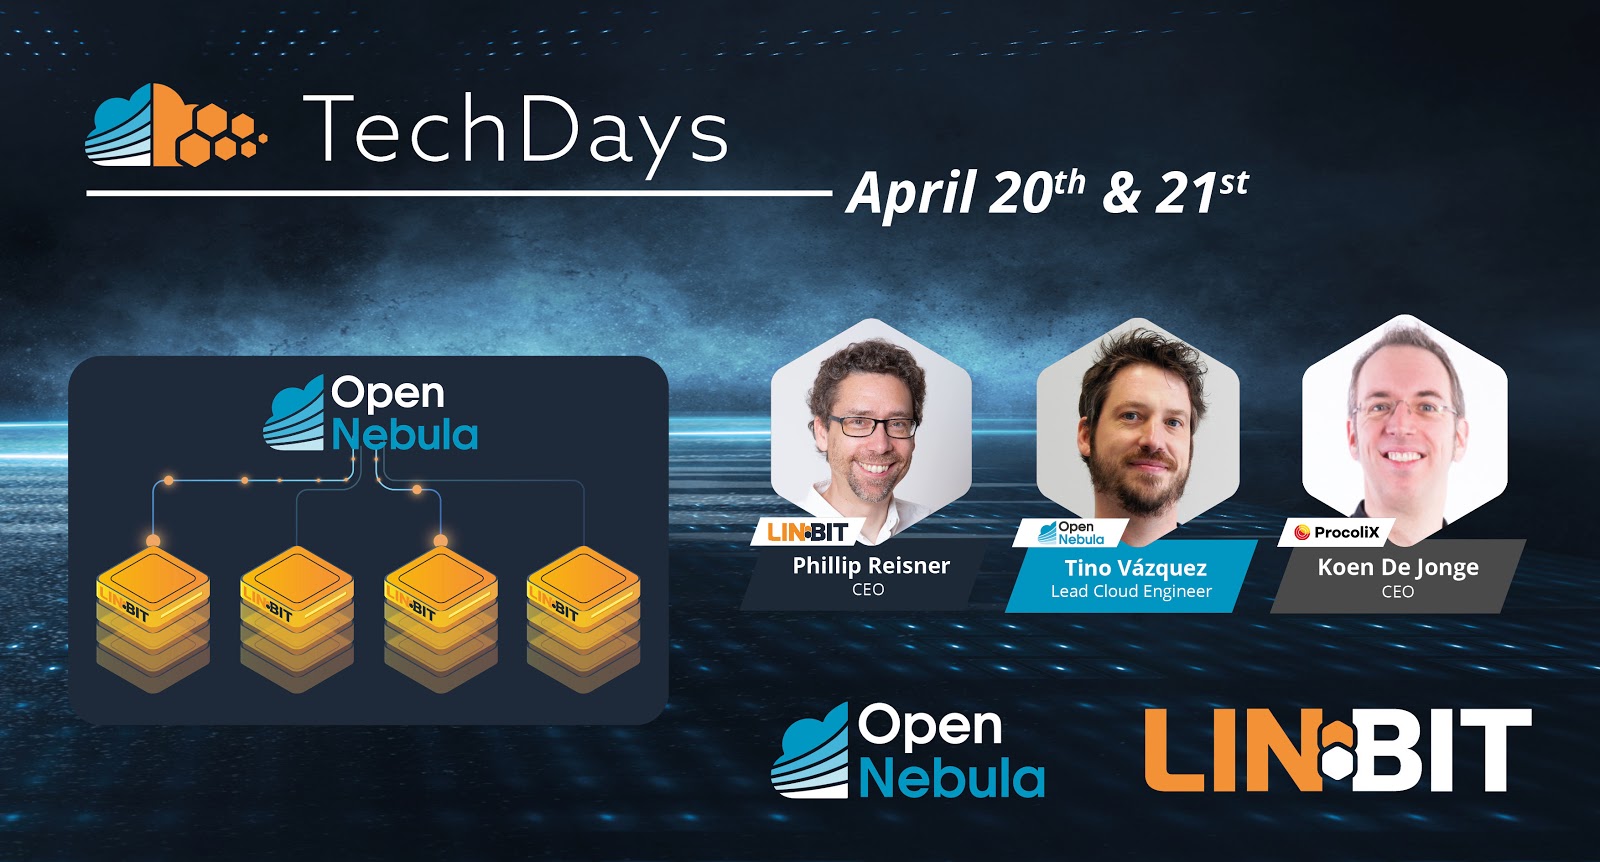 OpenNebula and LINBIT tech days speakers